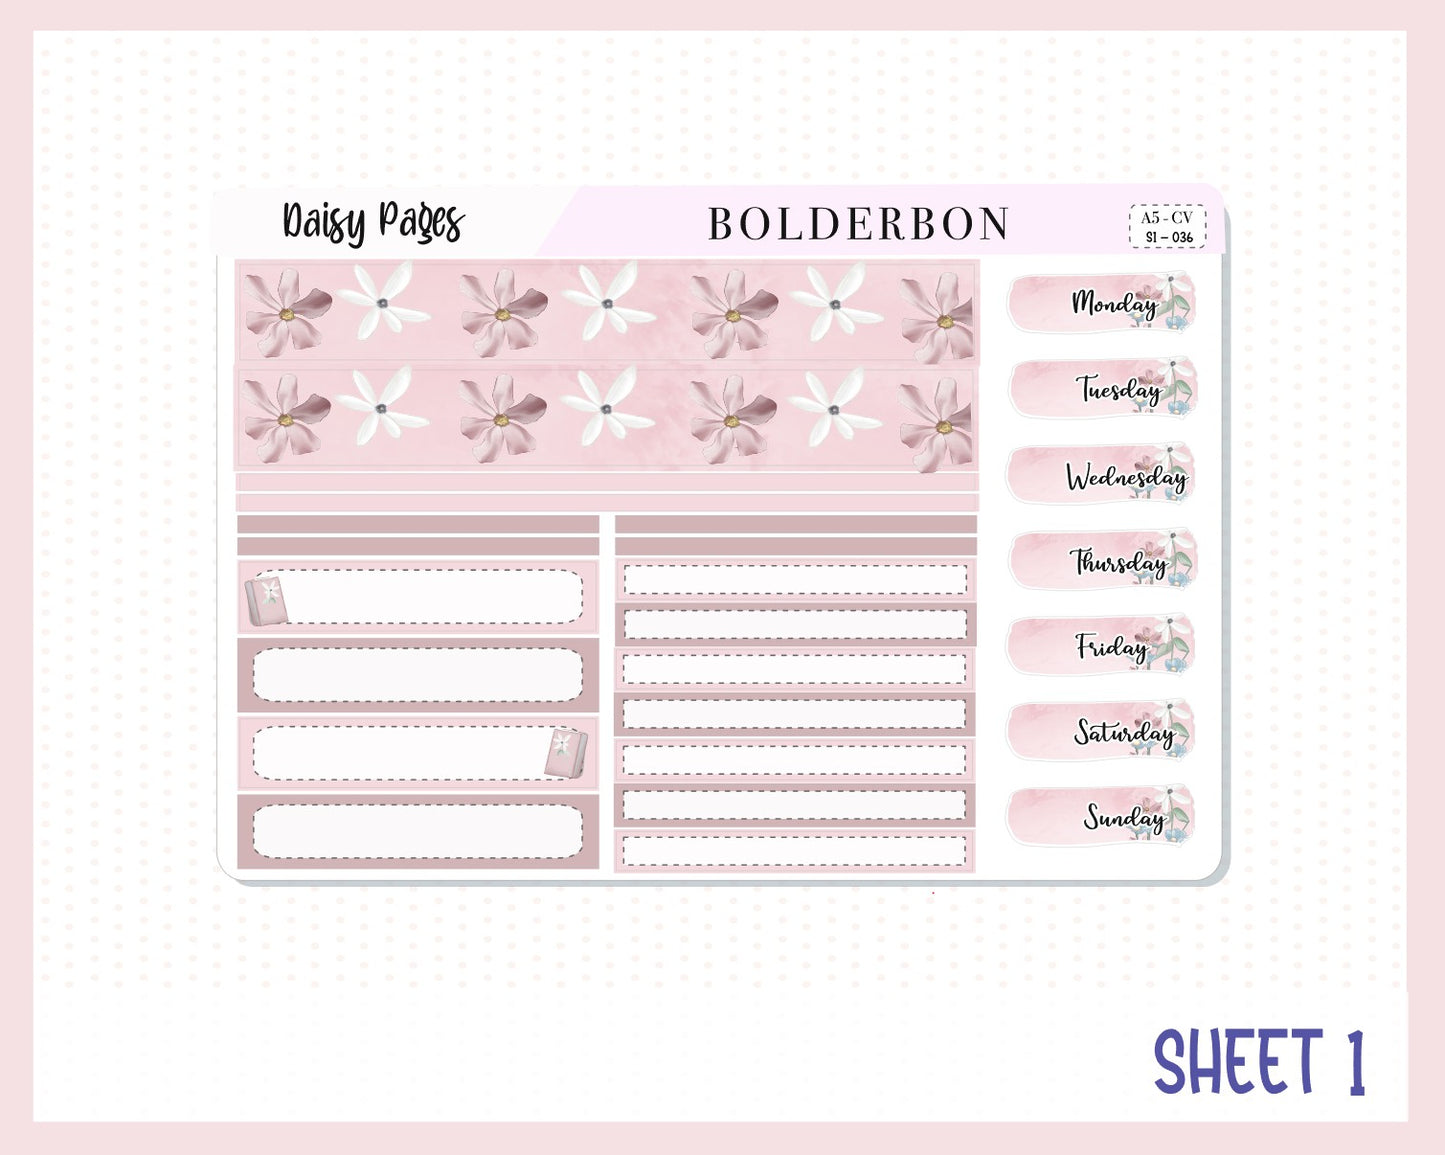 DAISY PAGES "Compact Vertical" || A5 Planner Sticker Kit, Bookish, Book Stickers